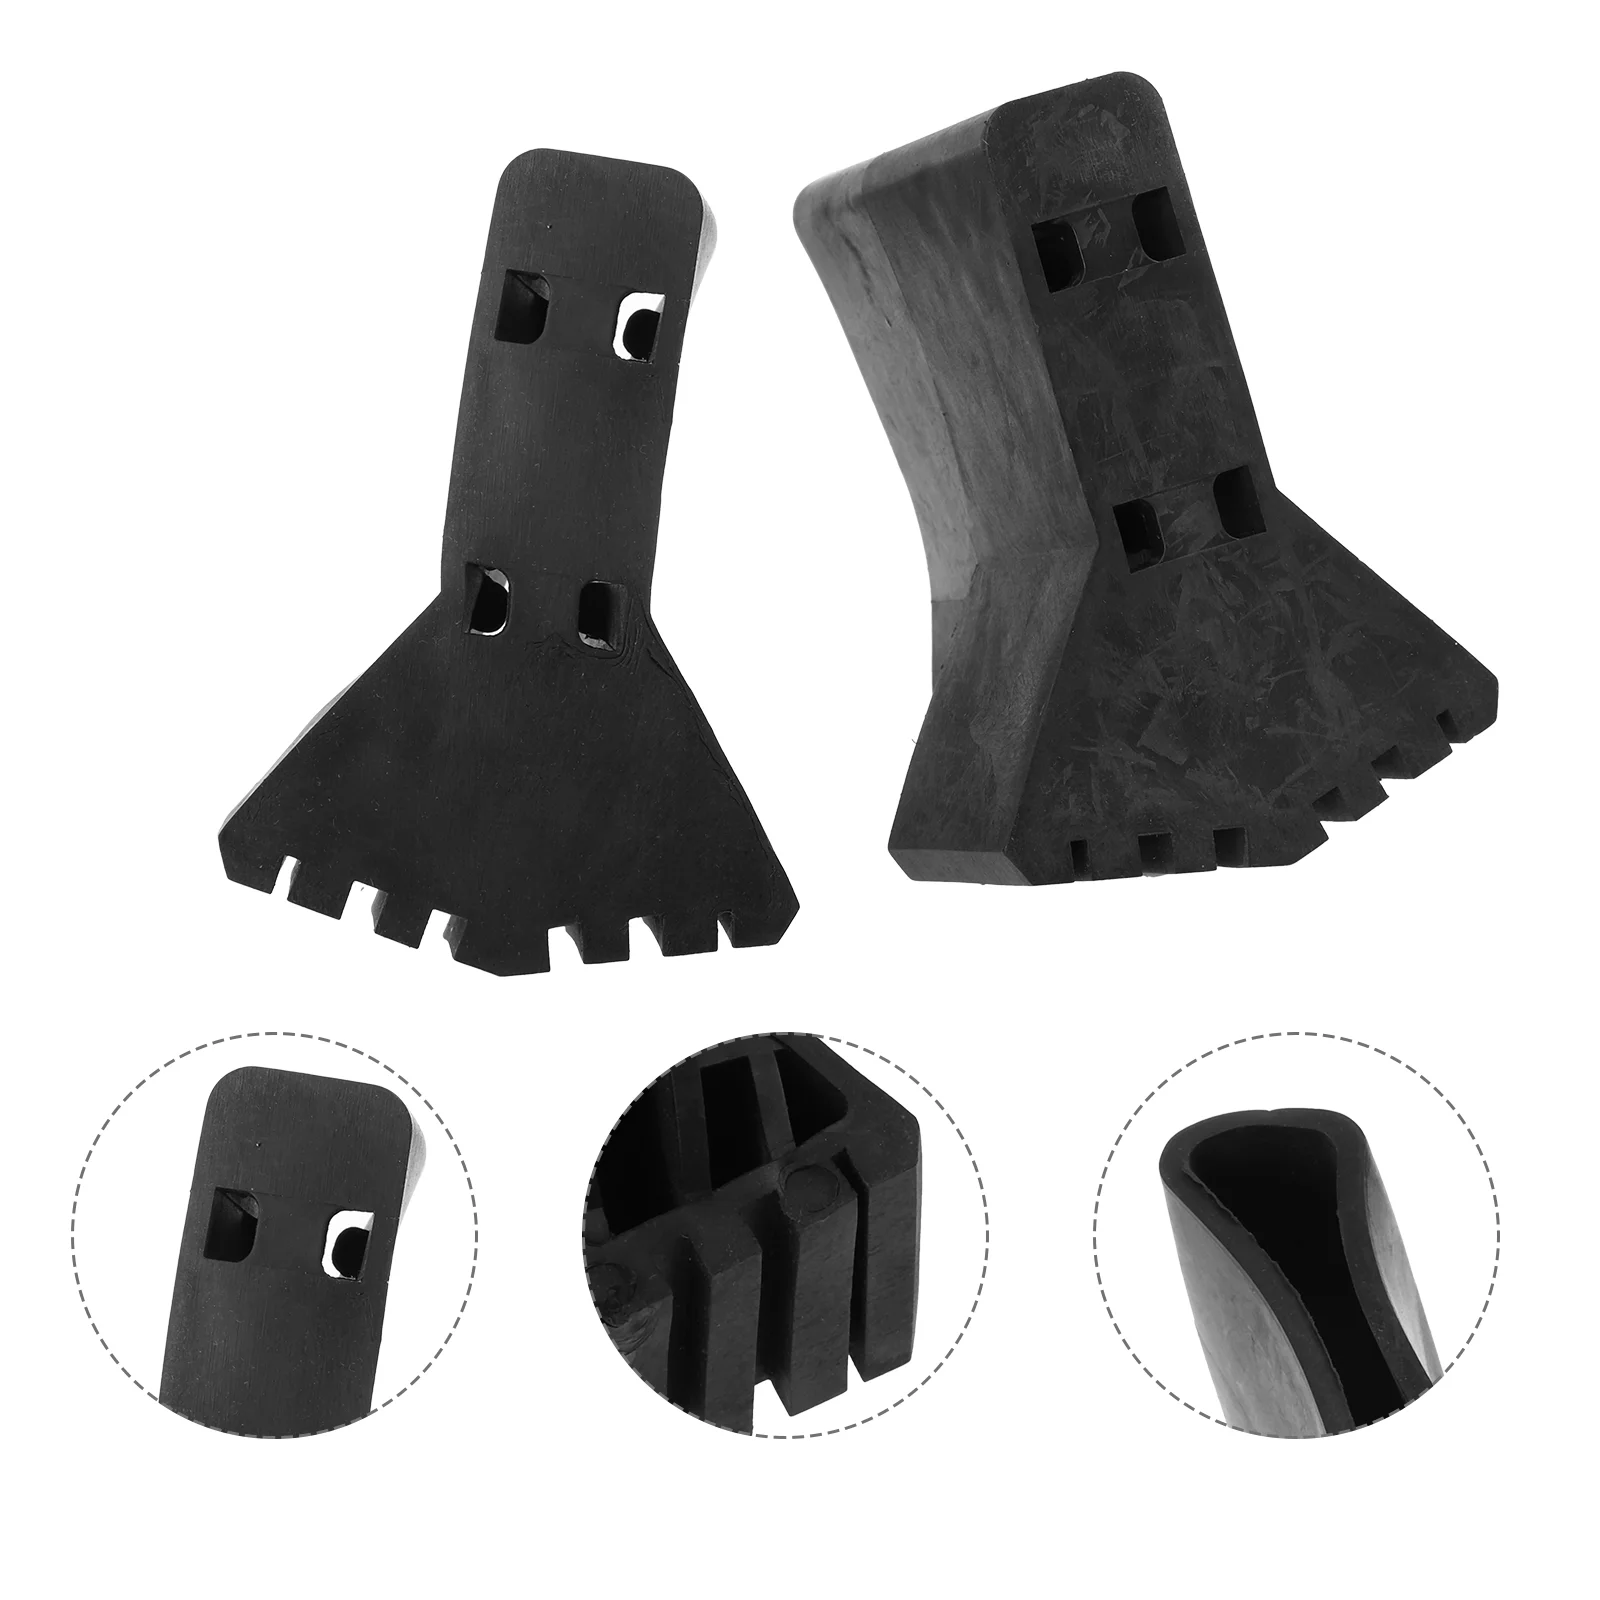 

2 Pcs Ladder Foot Cover Useful Covers Furniture Leg Pads Safety Mask Non-skid Feet Protector Rubber Non-slip Black Silicone Mat